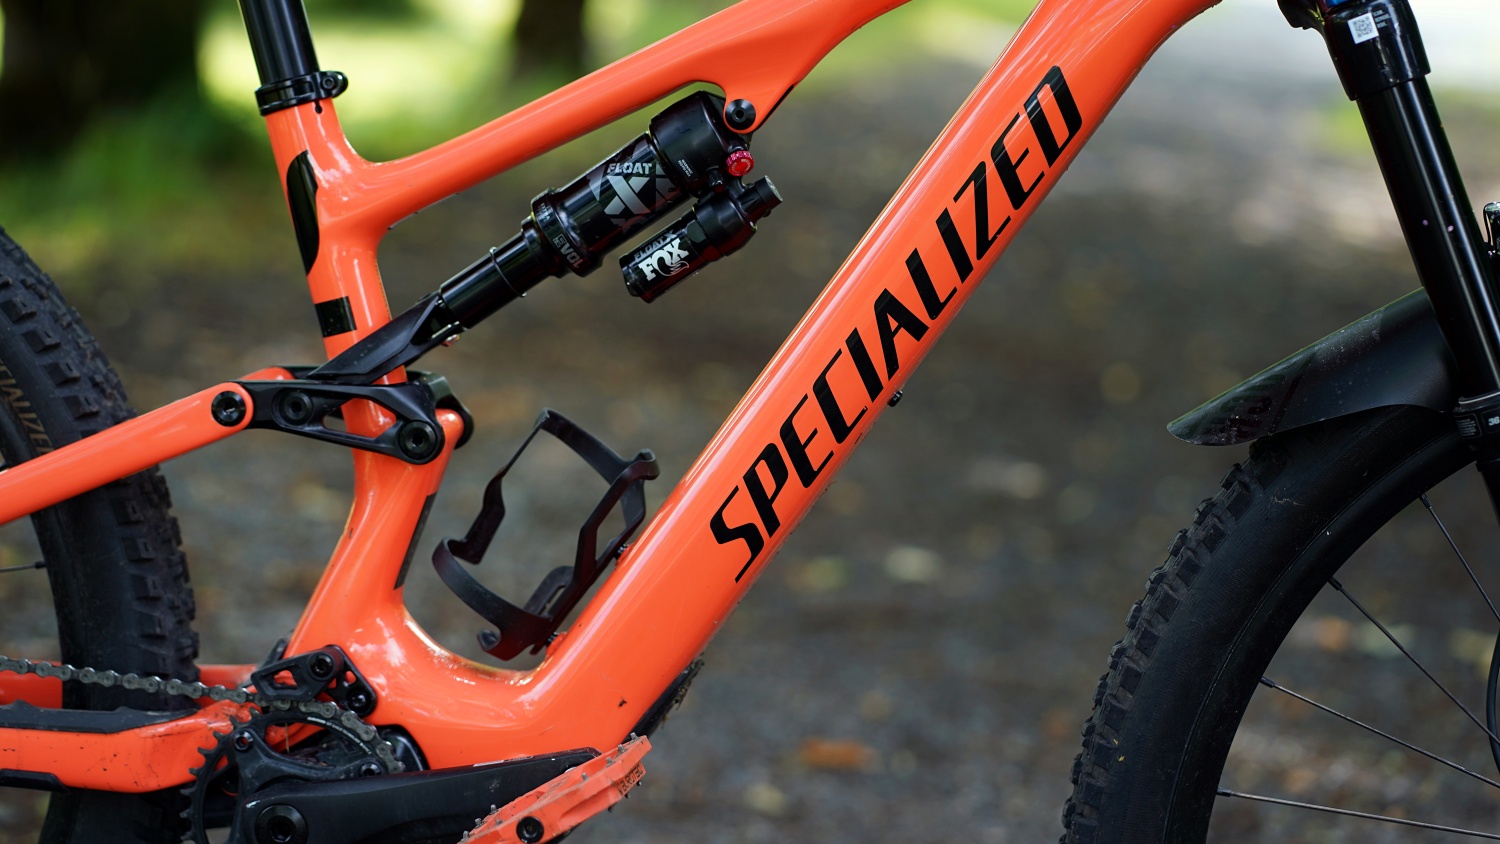 The battery is integrated in the downtube, the range extender sits in the bottle cage.